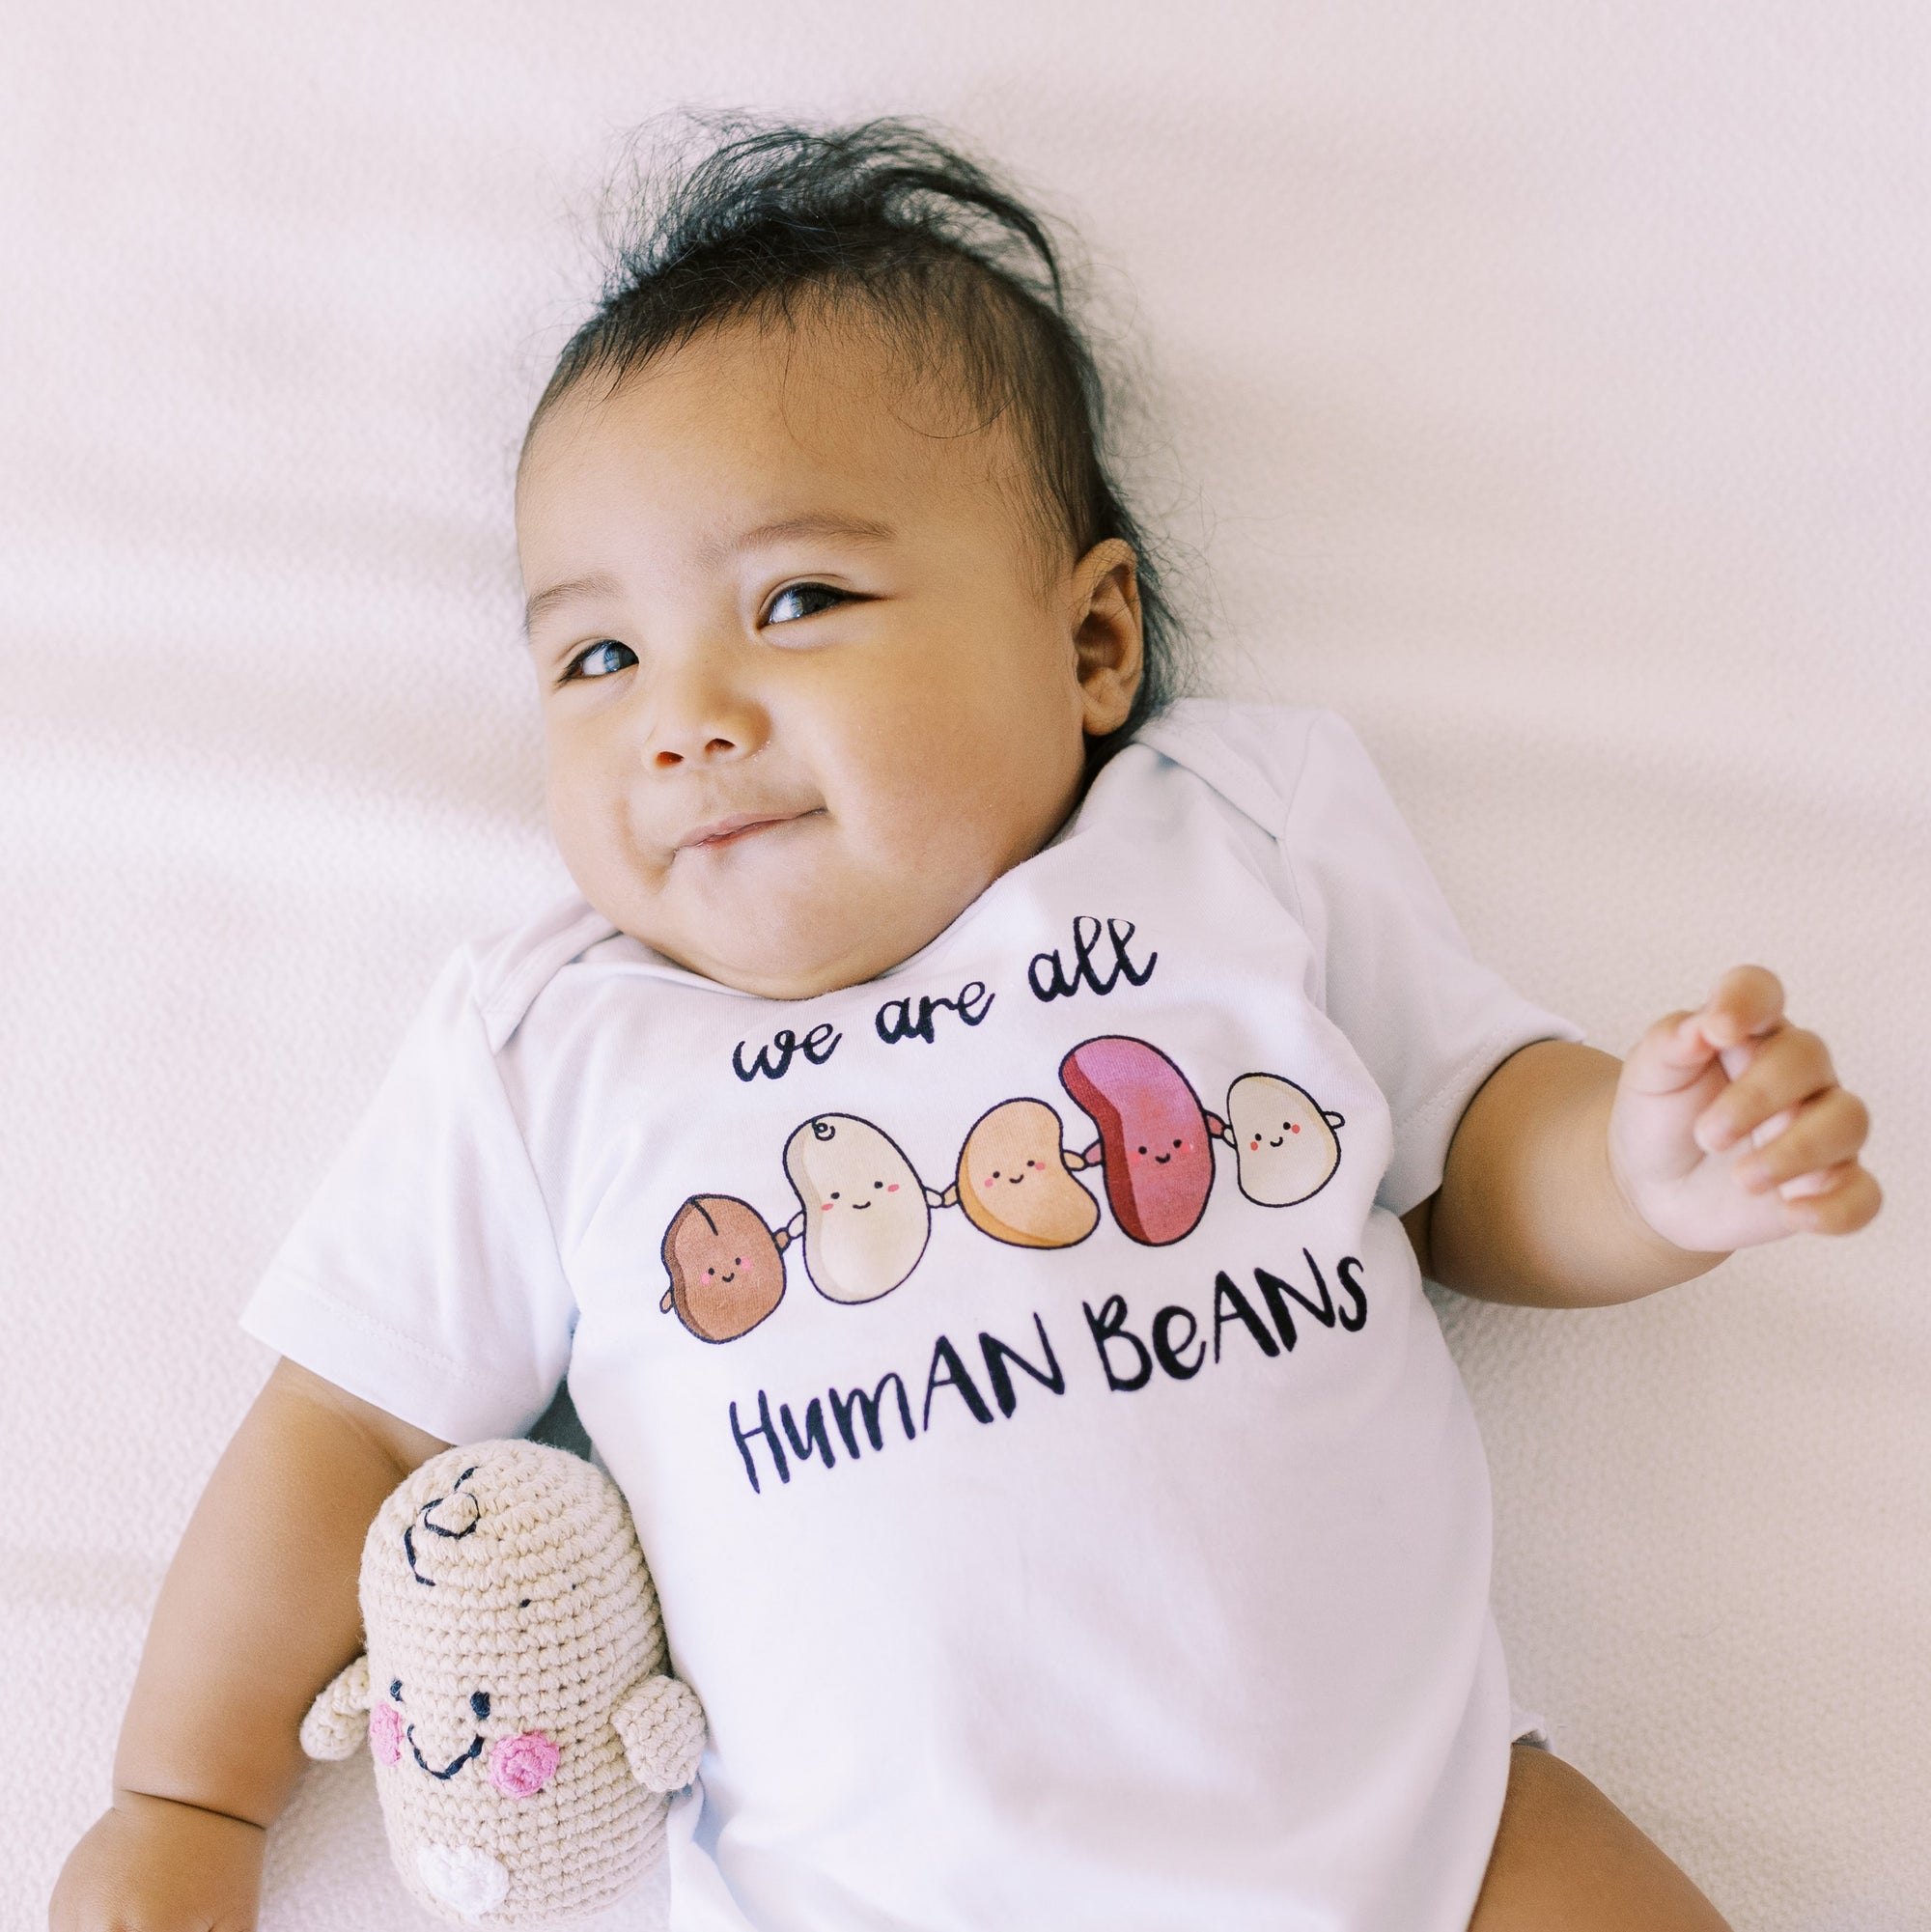 the wee bean organic cotton onesie in we are all human beans anti-hate anti-violence charity